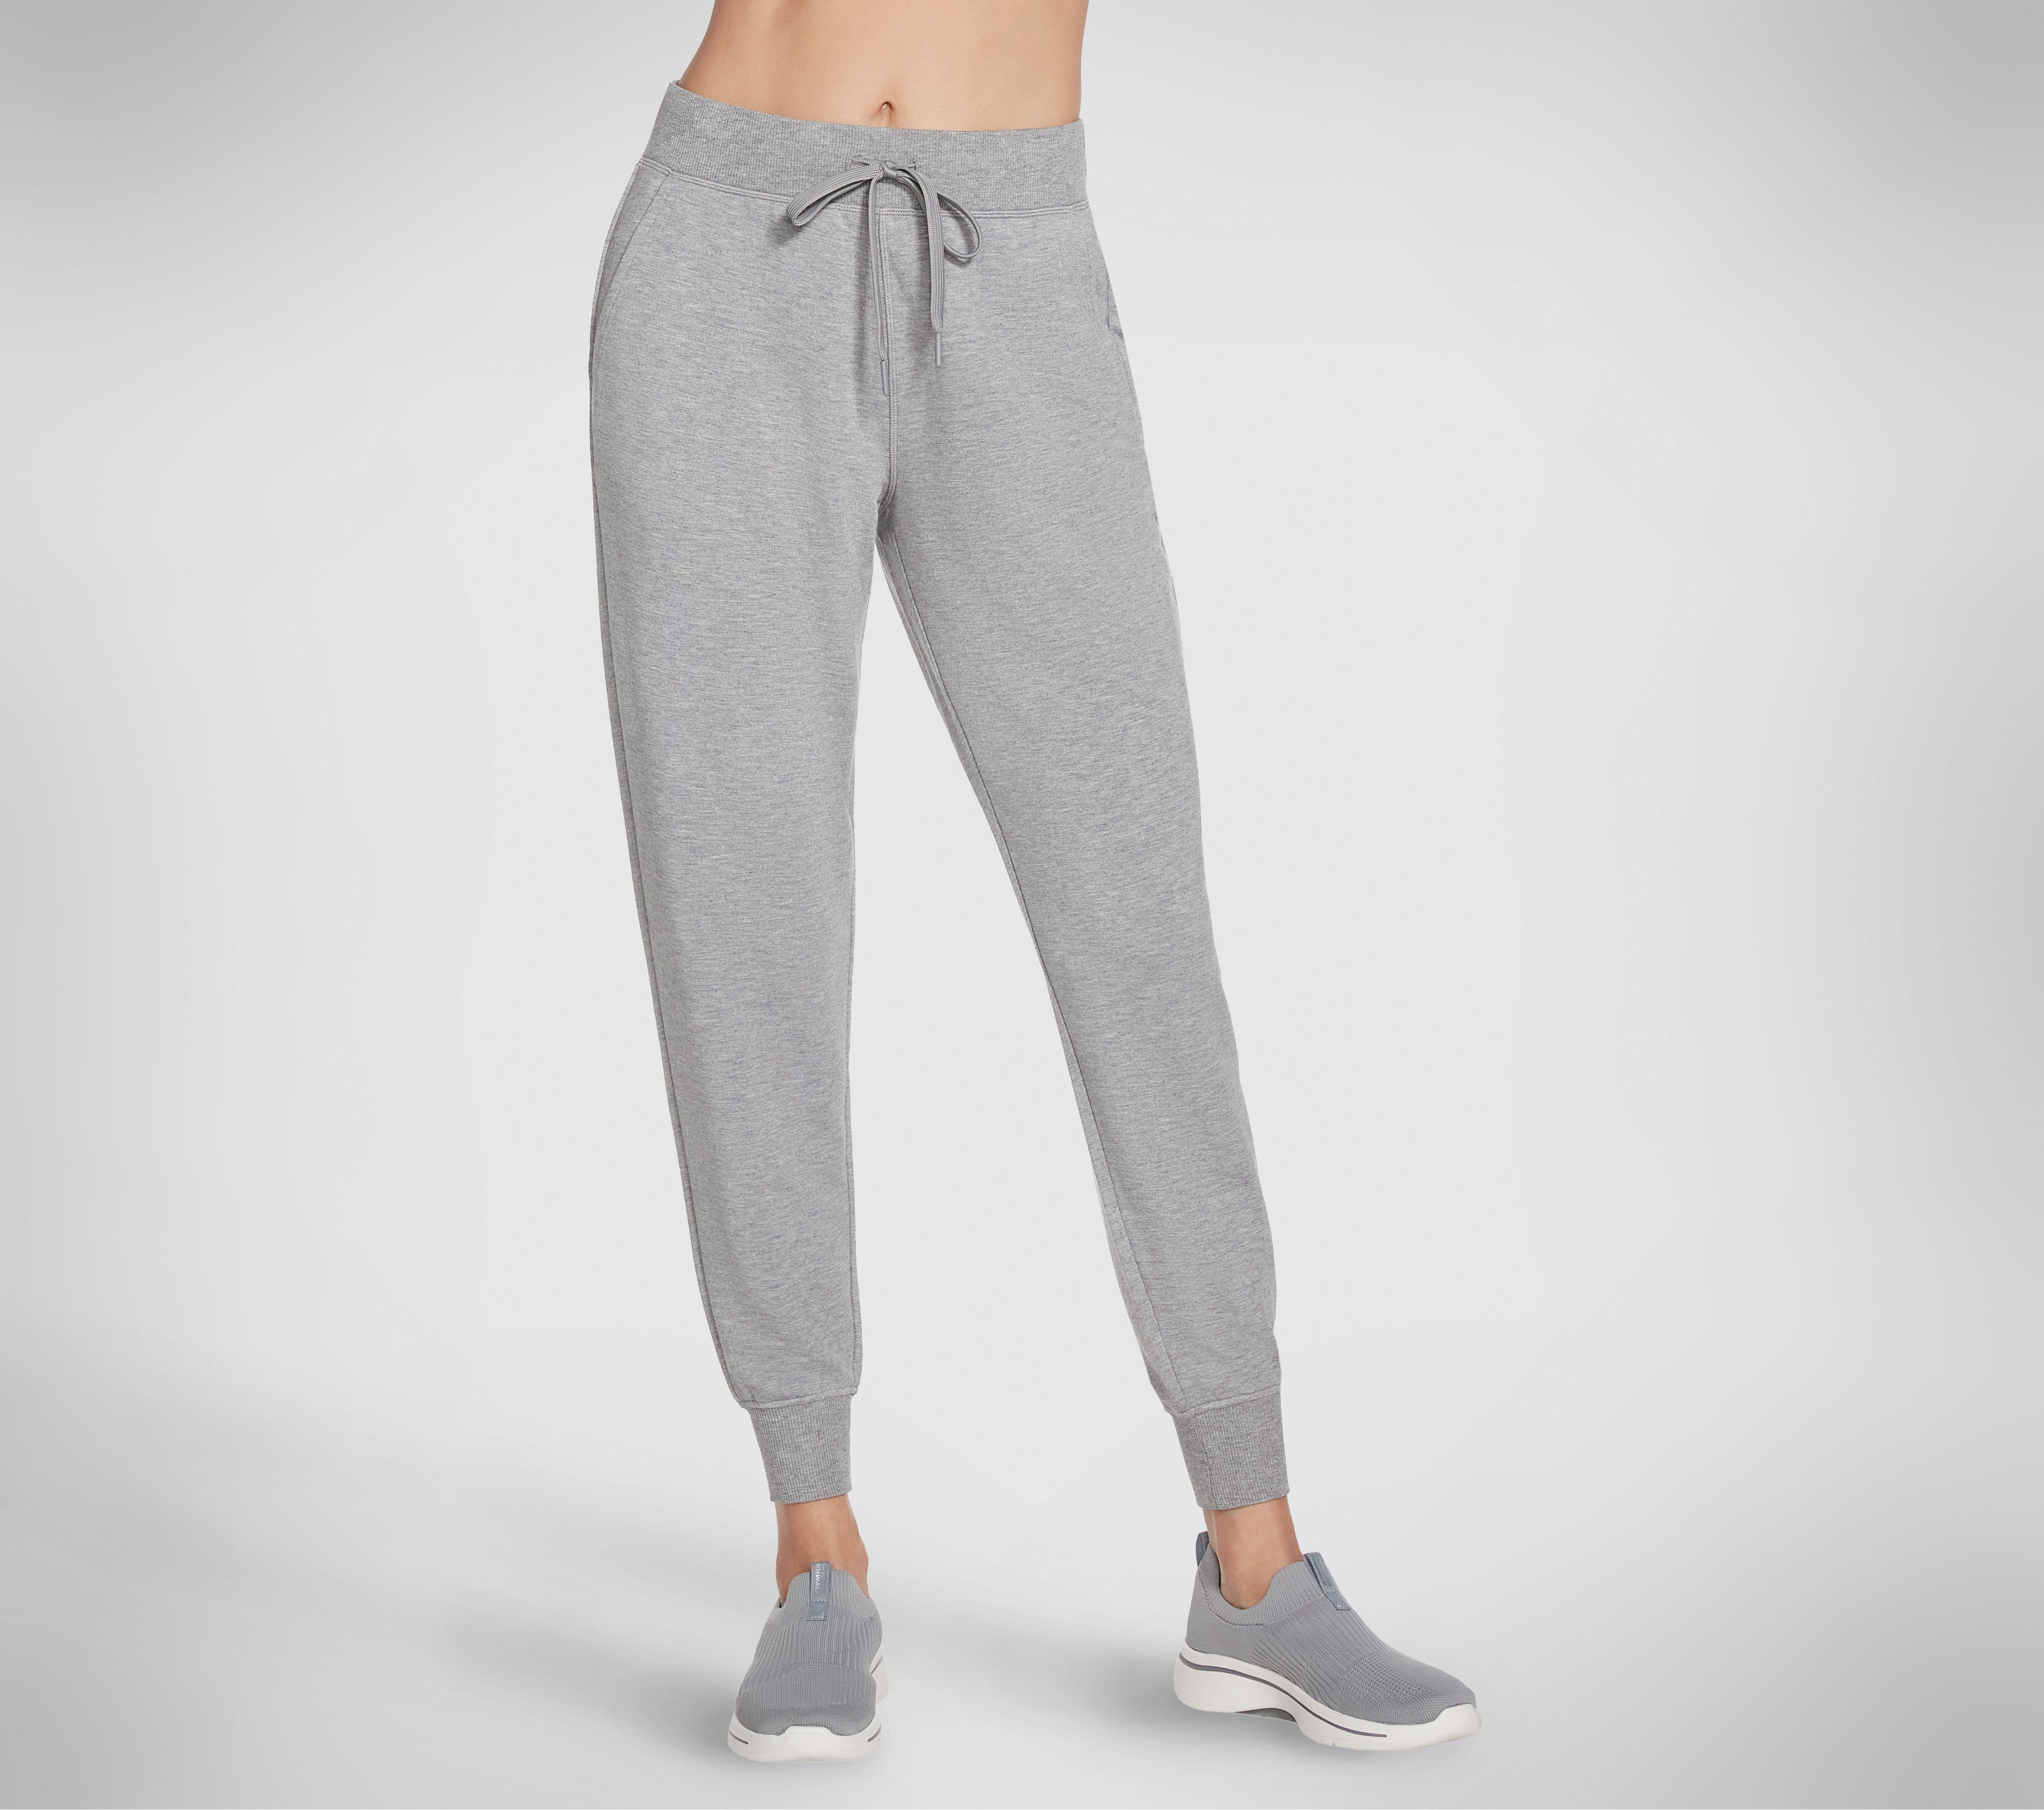 Shop the SKECHLUXE Restful Jogger Pant | SKECHERS CA